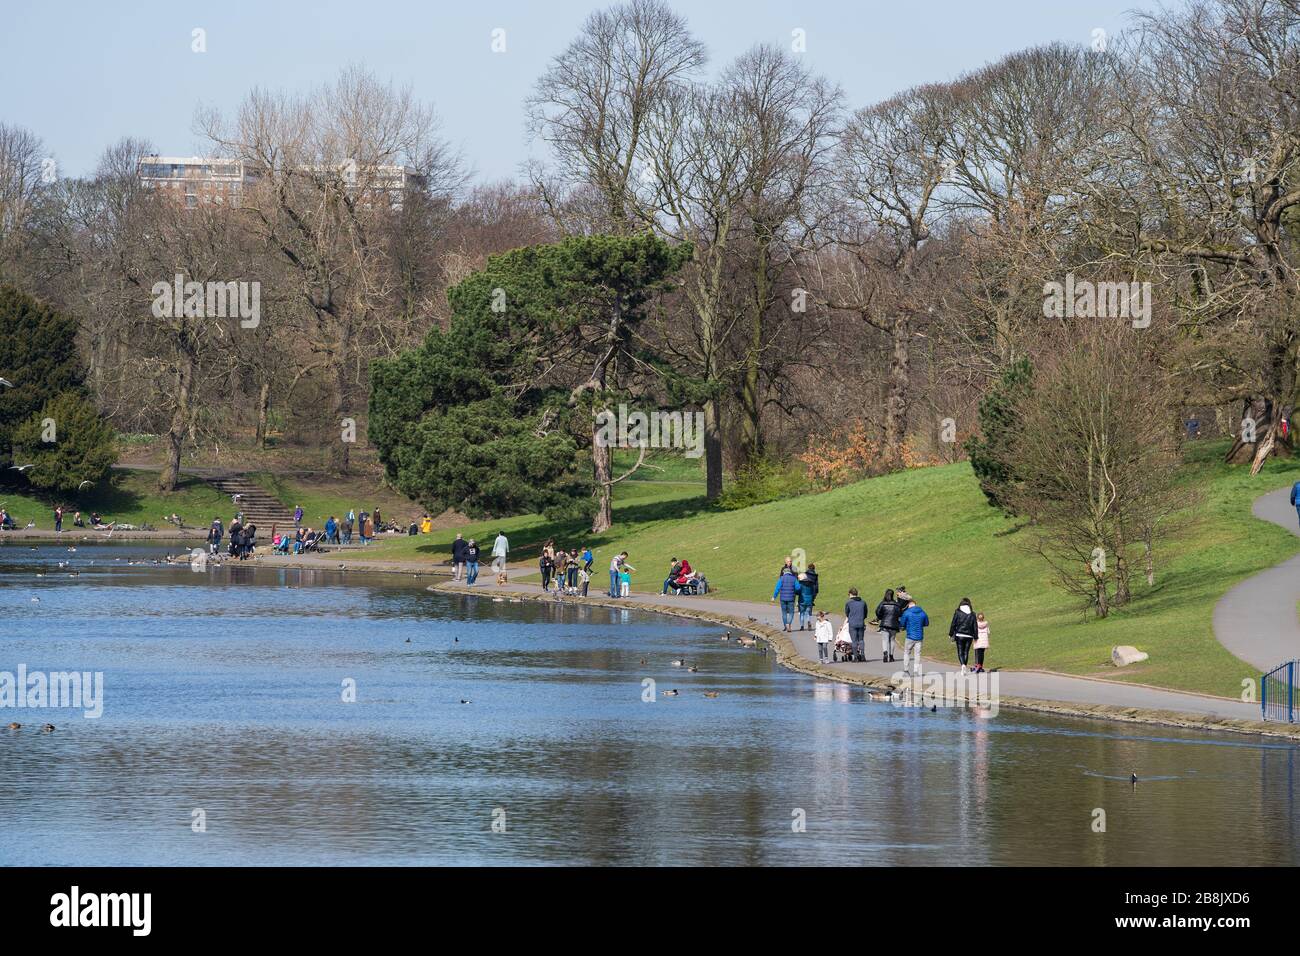 Sefton Park, Liverpool, UK. March 22, 2020. Many people out enjoying a walk in Sefton Park, Liverpool in north-west England, despite the UK government advising people to begin social distancing, and reduce social interaction, to try and reduce the transmission of Coronavirus. Credit: Christopher Middleton/Alamy Live News Stock Photo